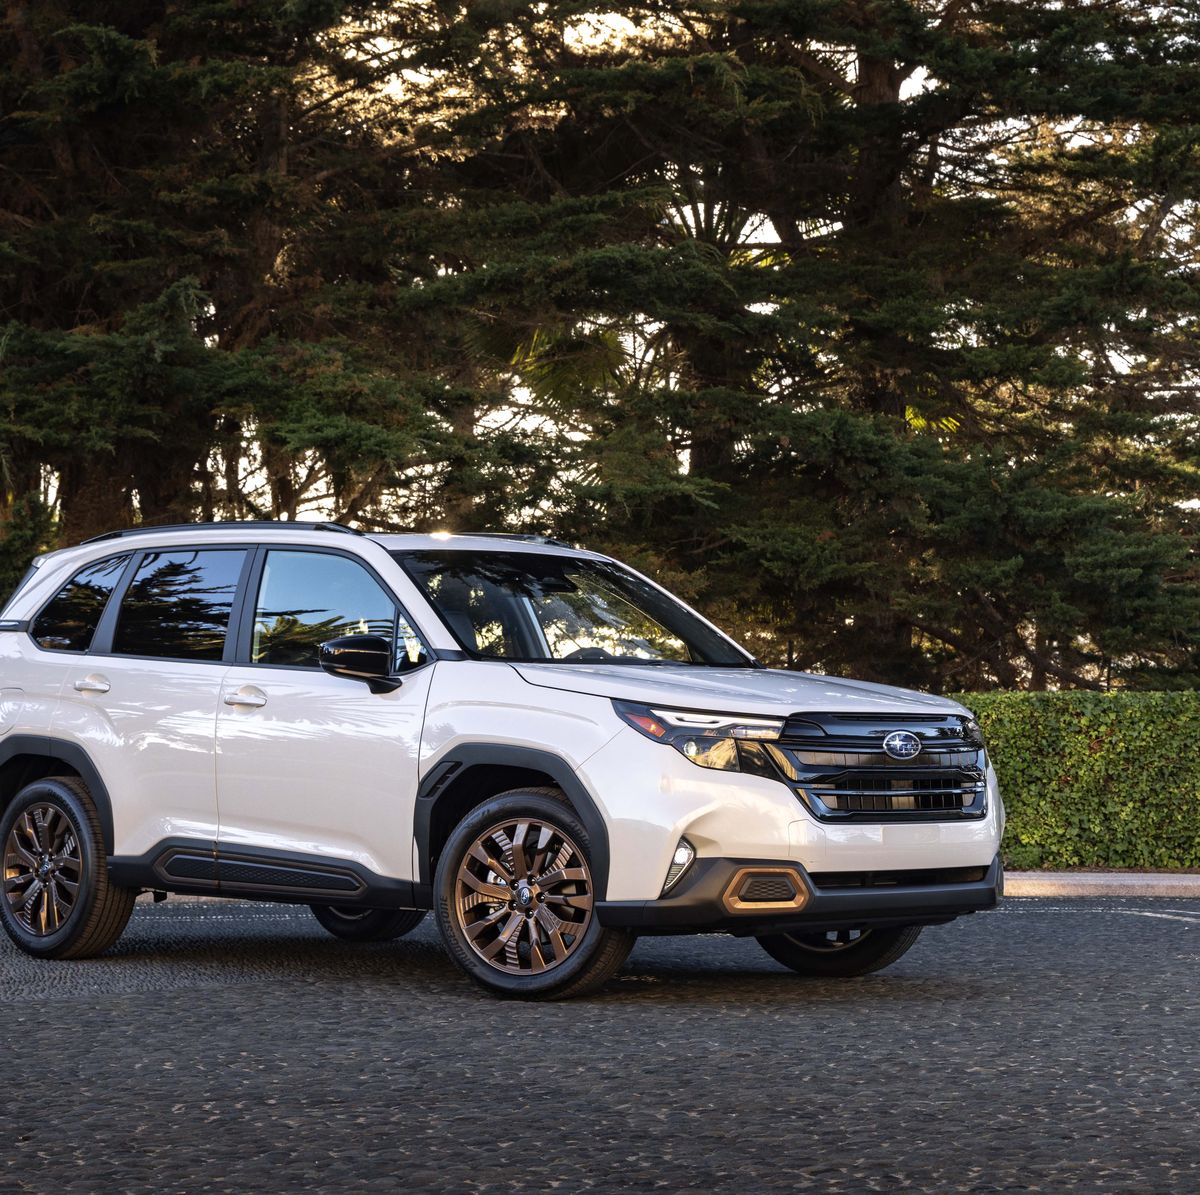 Improved Styling, Chassis, and Interior Revive Subaru Forester